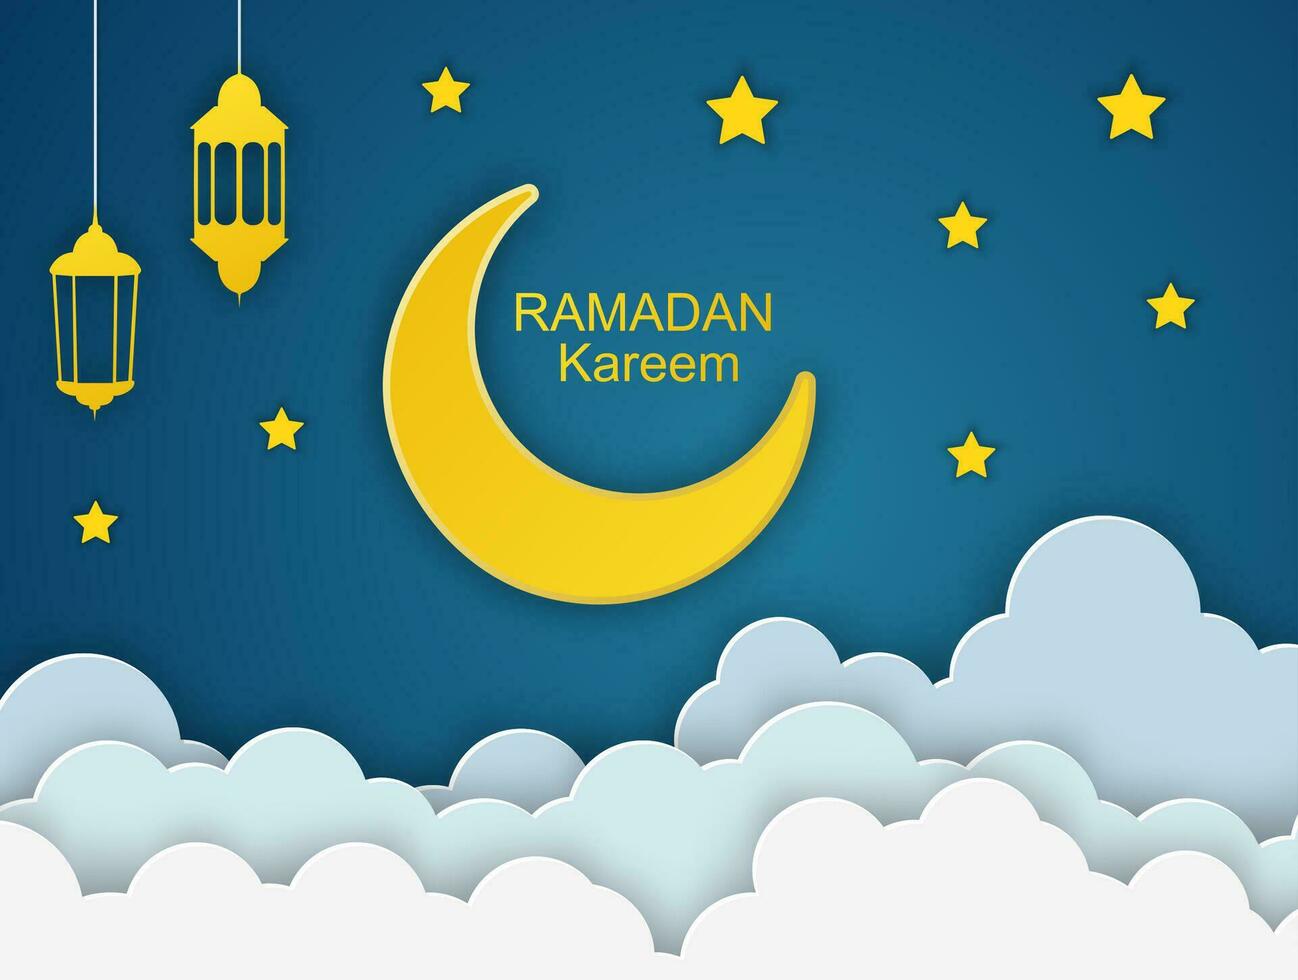 Ramadan Kareem with Gold Moon, 3d Paper cut Clouds and Stars on Night Sky Background. Vector illustration. Traditional Lanterns and Place for your Text.